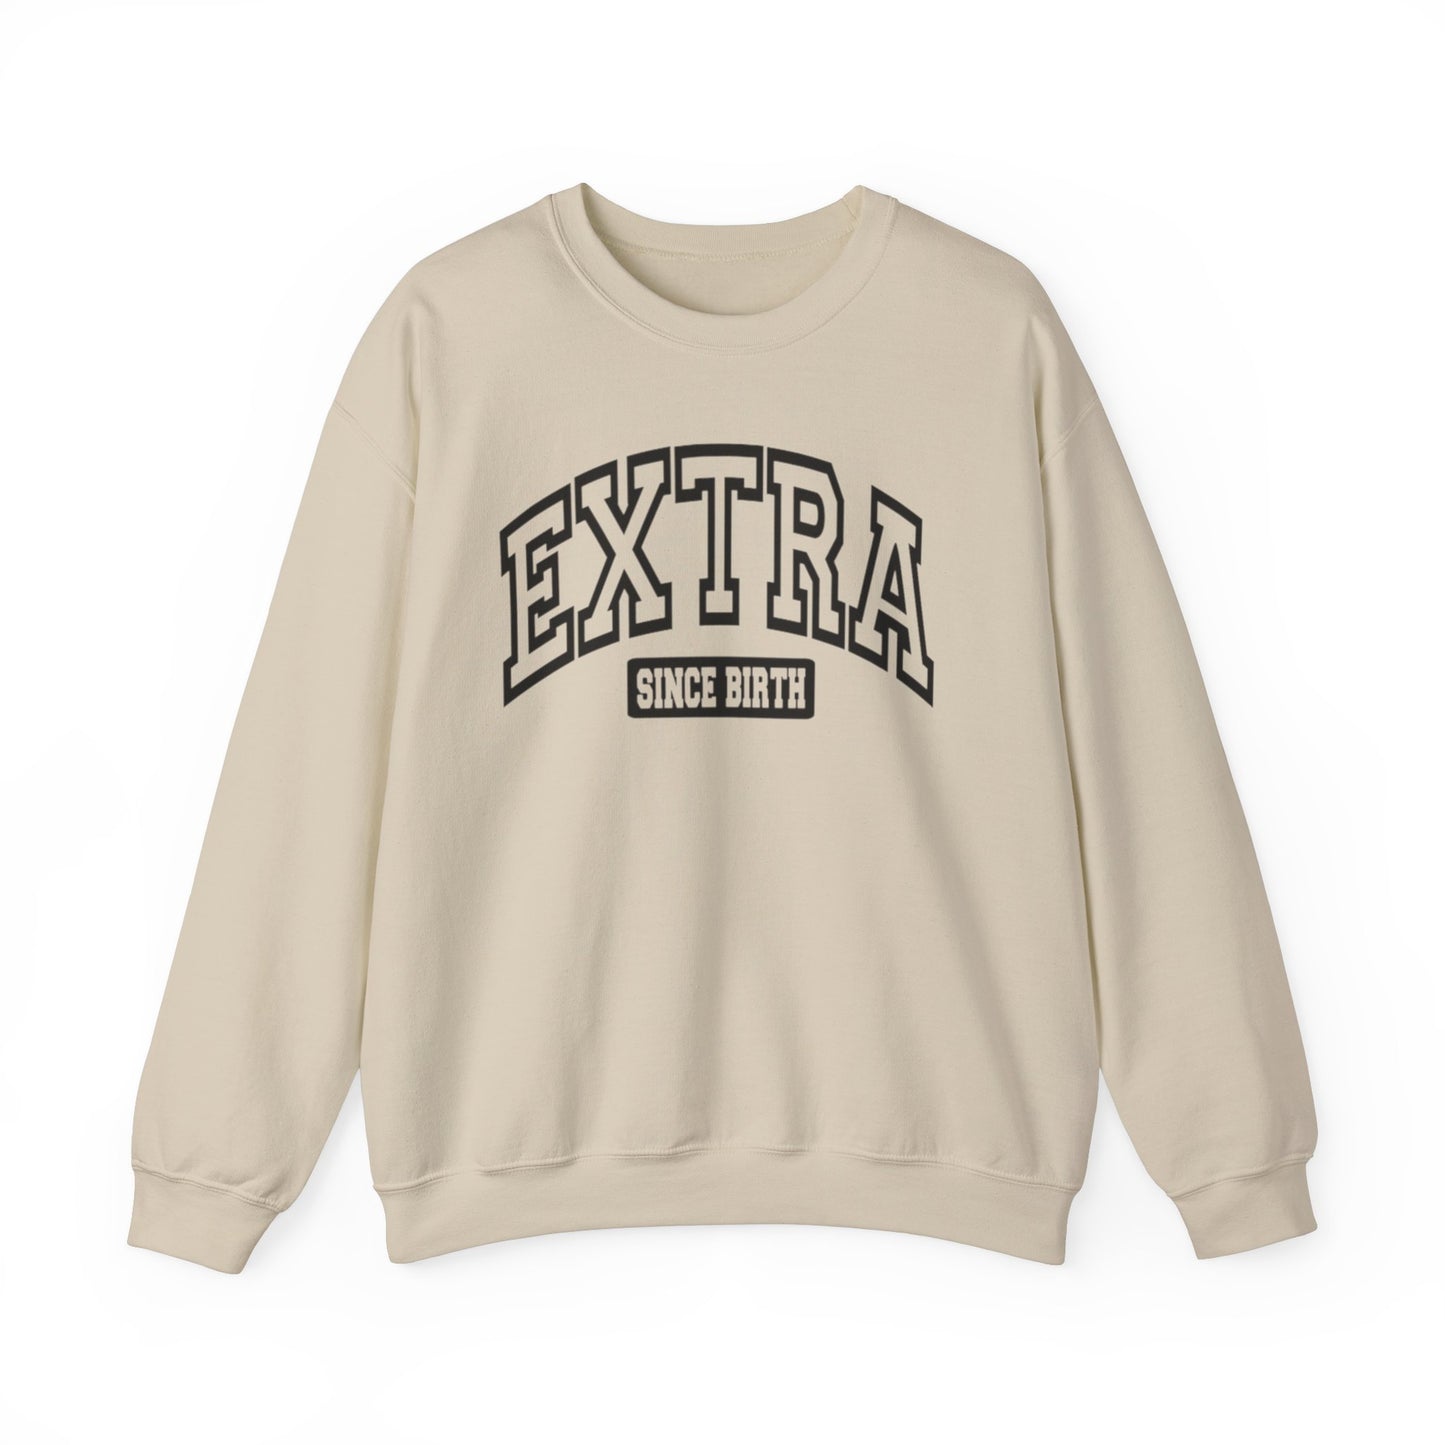 Extra Since Birth Unisex Statement Sweatshirt for Fabulous Fashionista, Over the top Sweatshirt to Stand Out, Mental Health Awareness Proud